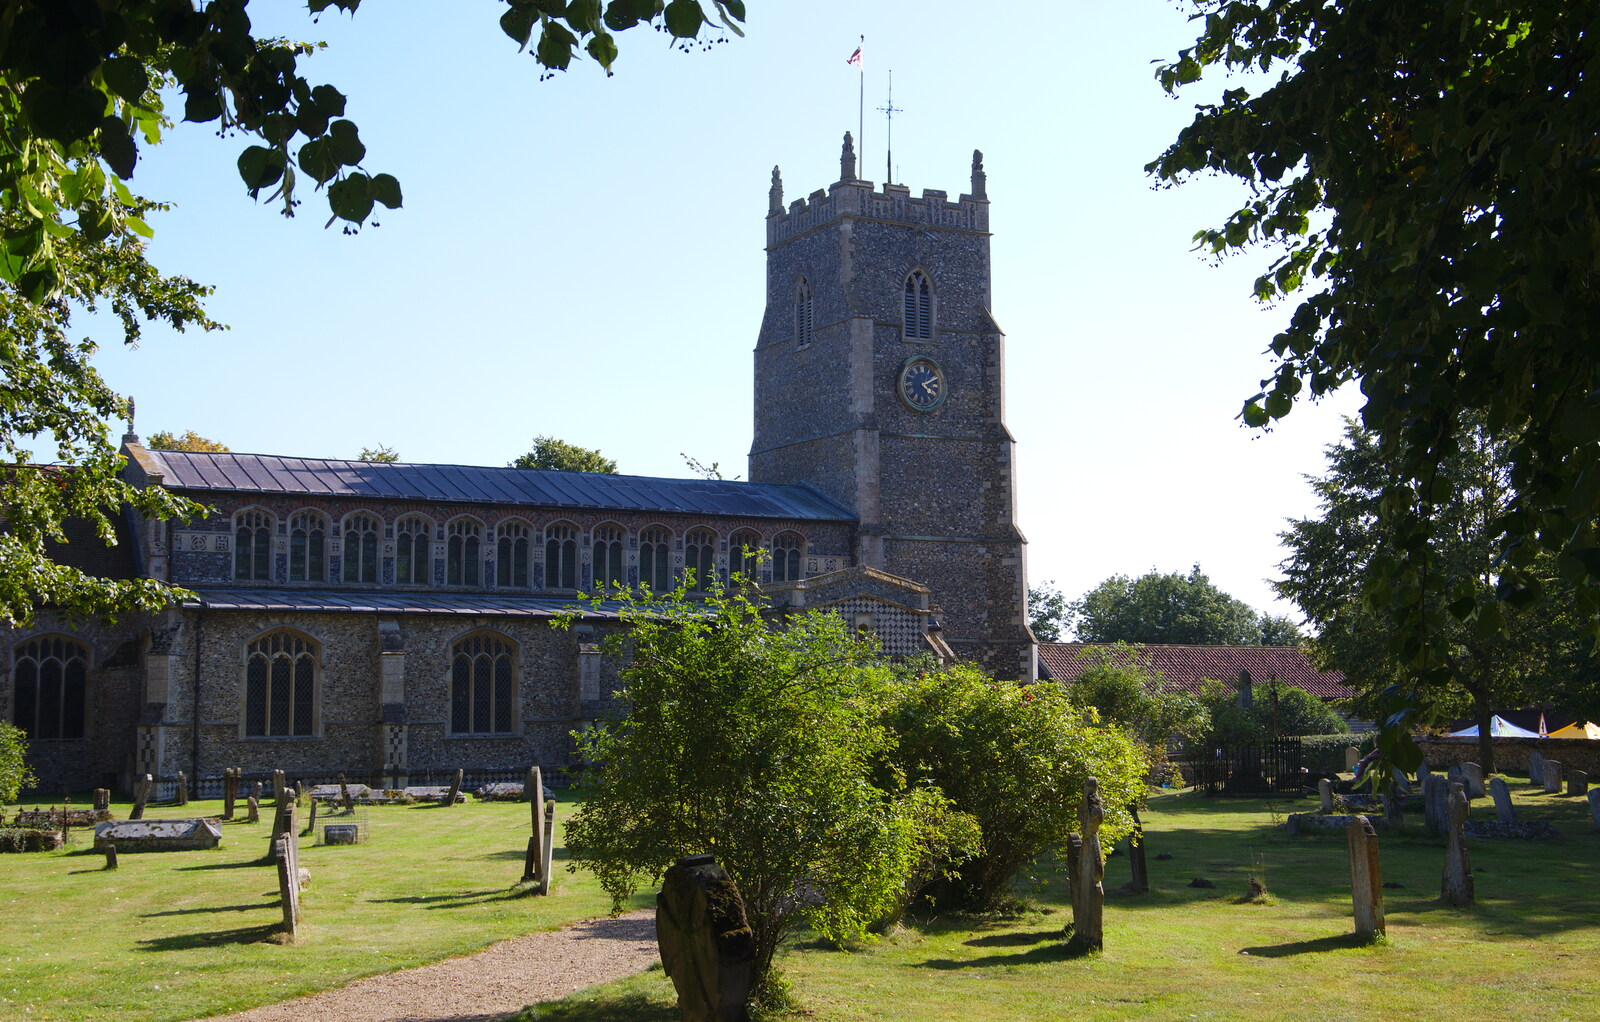 St. Mary's Church, Walsham from The Gislingham Silver Band at Walsham Le Willows, Suffolk - 26th August 2019